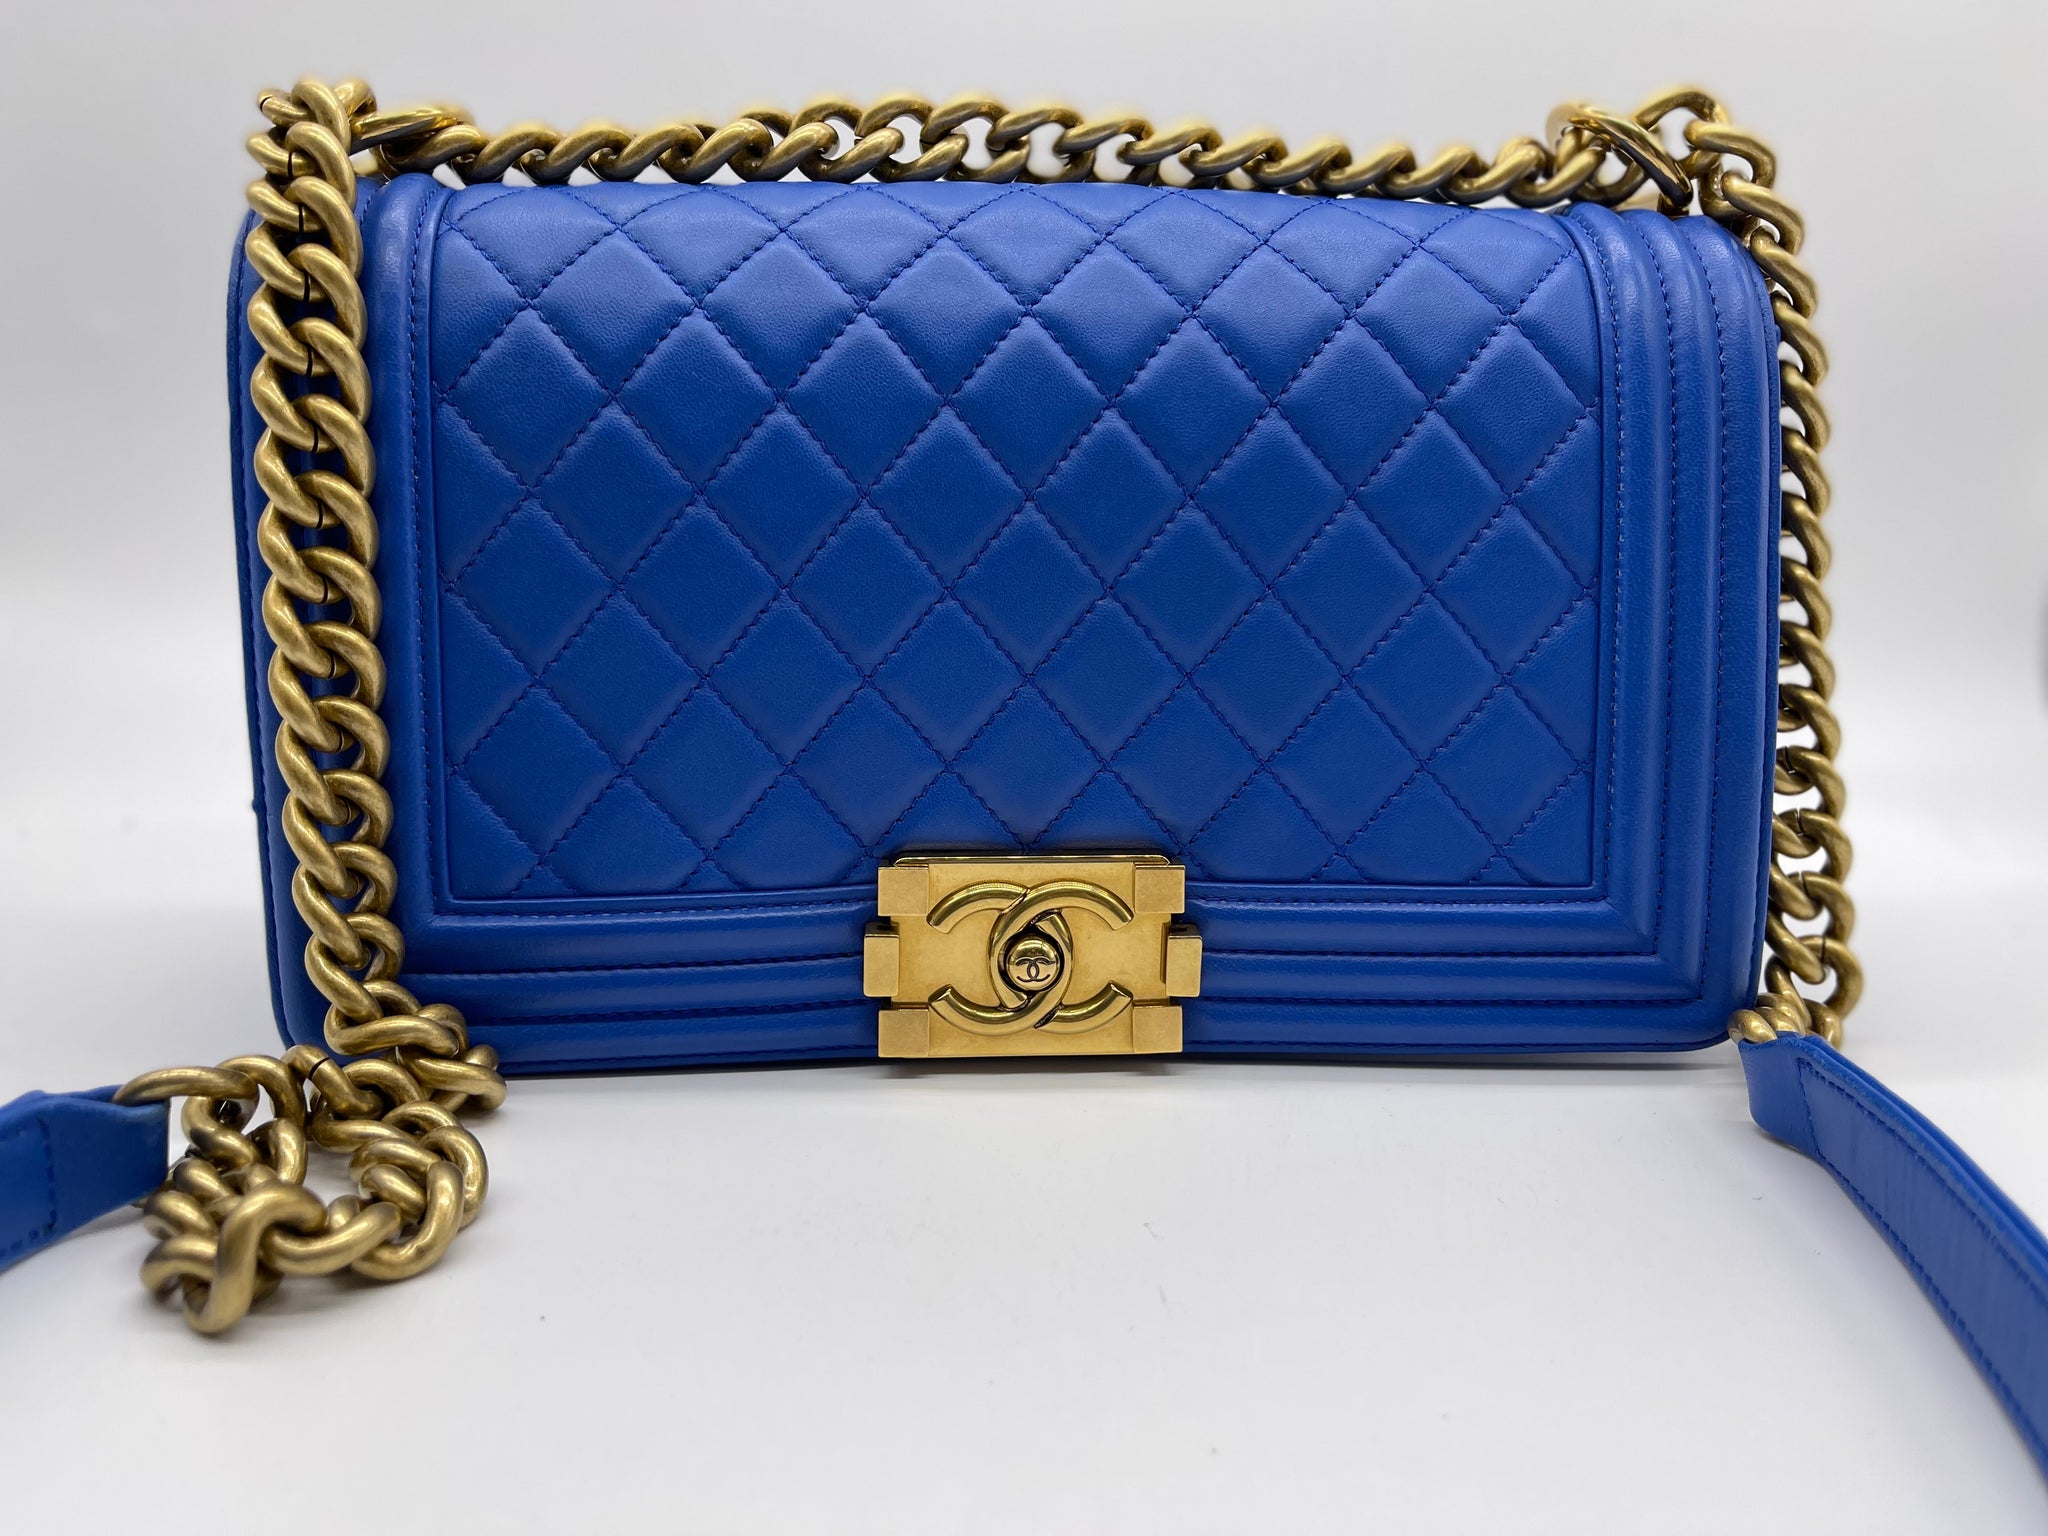 Chanel Boy Bag Review - A Glam Lifestyle